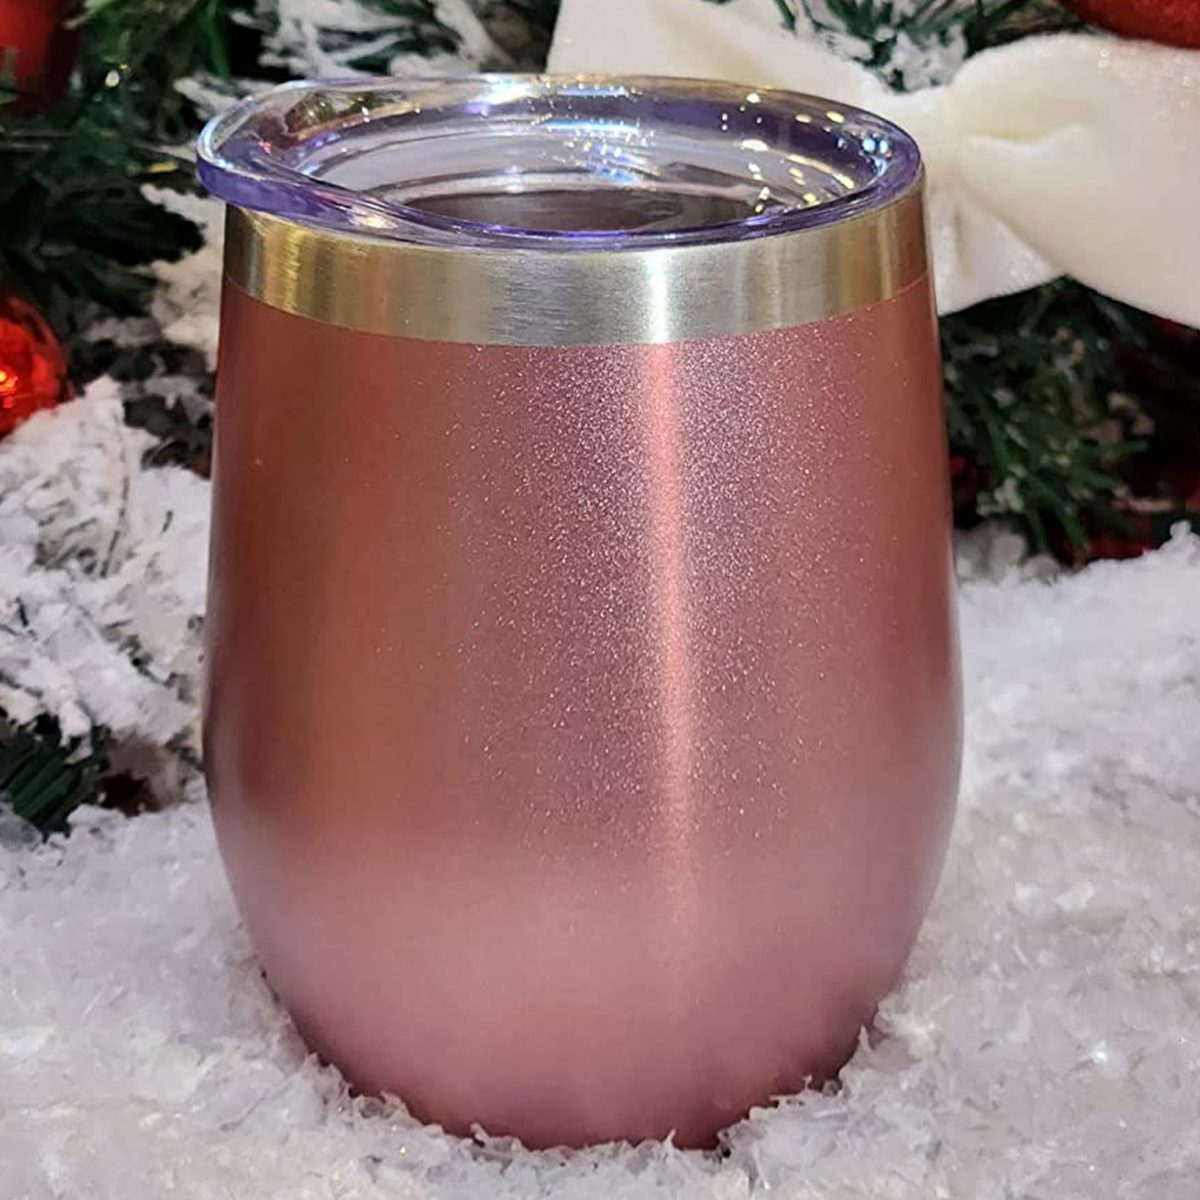 https://www.tasteofhome.com/wp-content/uploads/2023/05/Chillout-Life-Stainless-Steel-Tumbler_ecomm_via-amazon.com_.jpg?fit=700%2C700